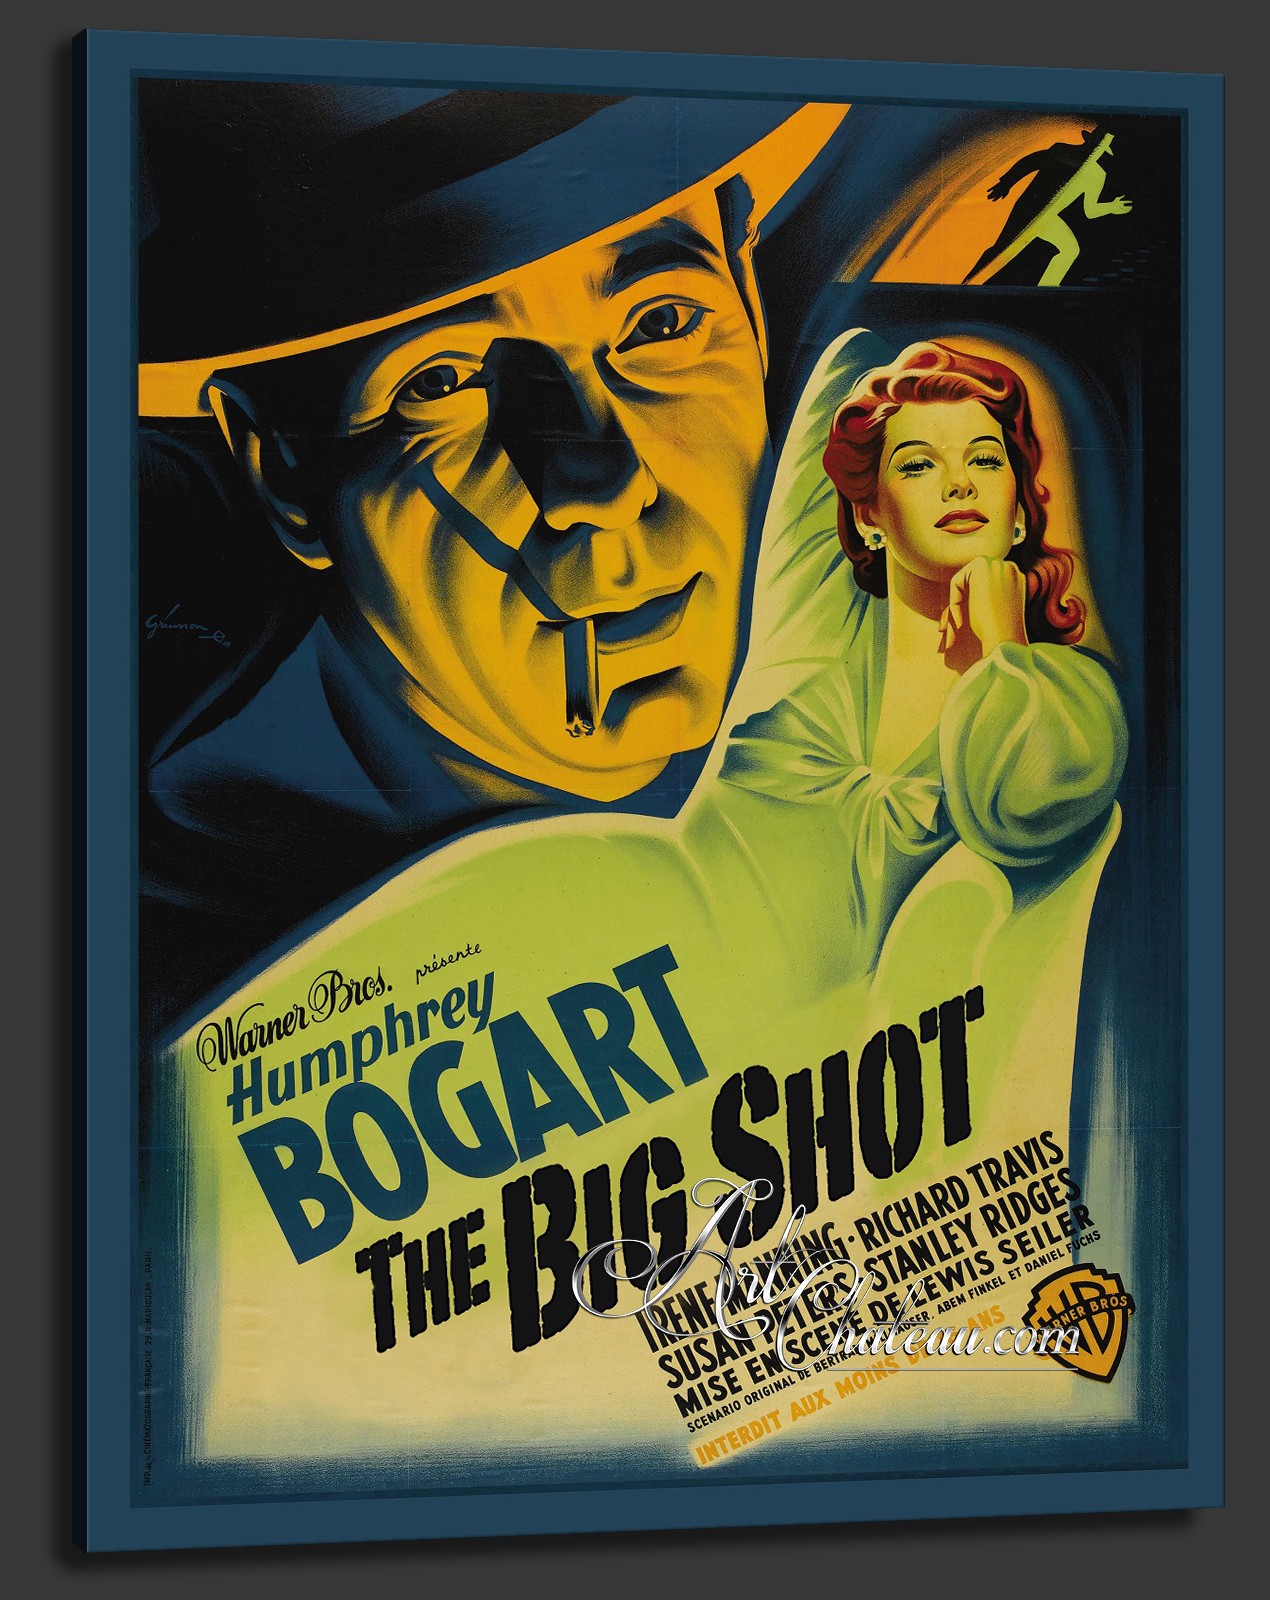 Vintage Style Movie Poster, The Big Shot